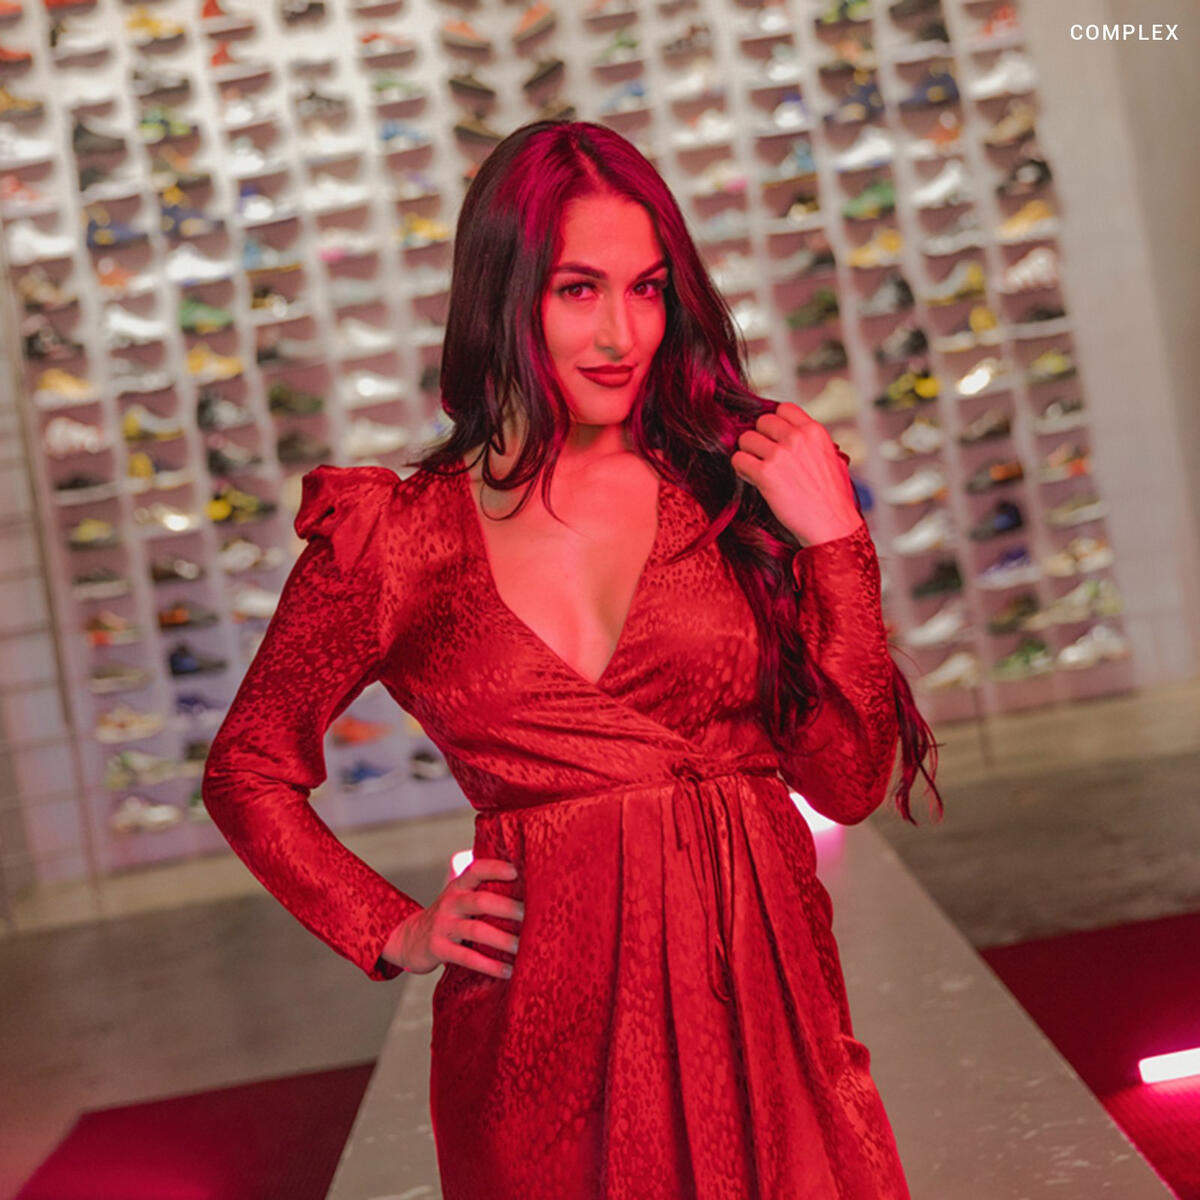 Nikki Bella goes Sneaker Shopping with Complex: photos